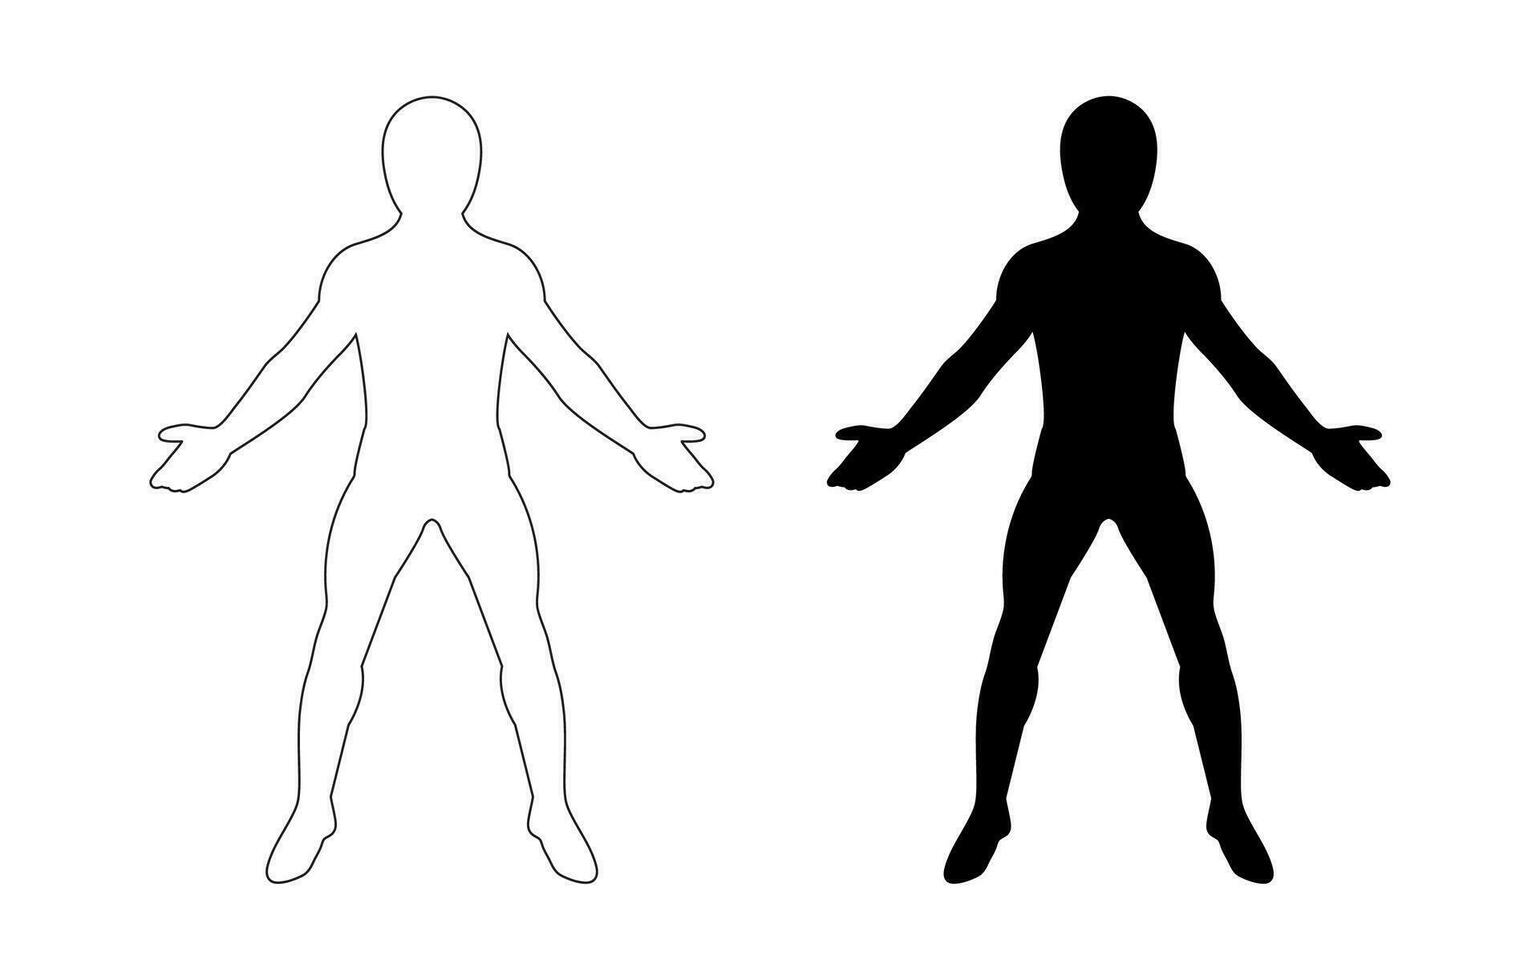 Male Body Silhouette, Male Figure Outline, Simple Masculine Figures, Generic Human Body, Standing Human Body Arms Outward vector